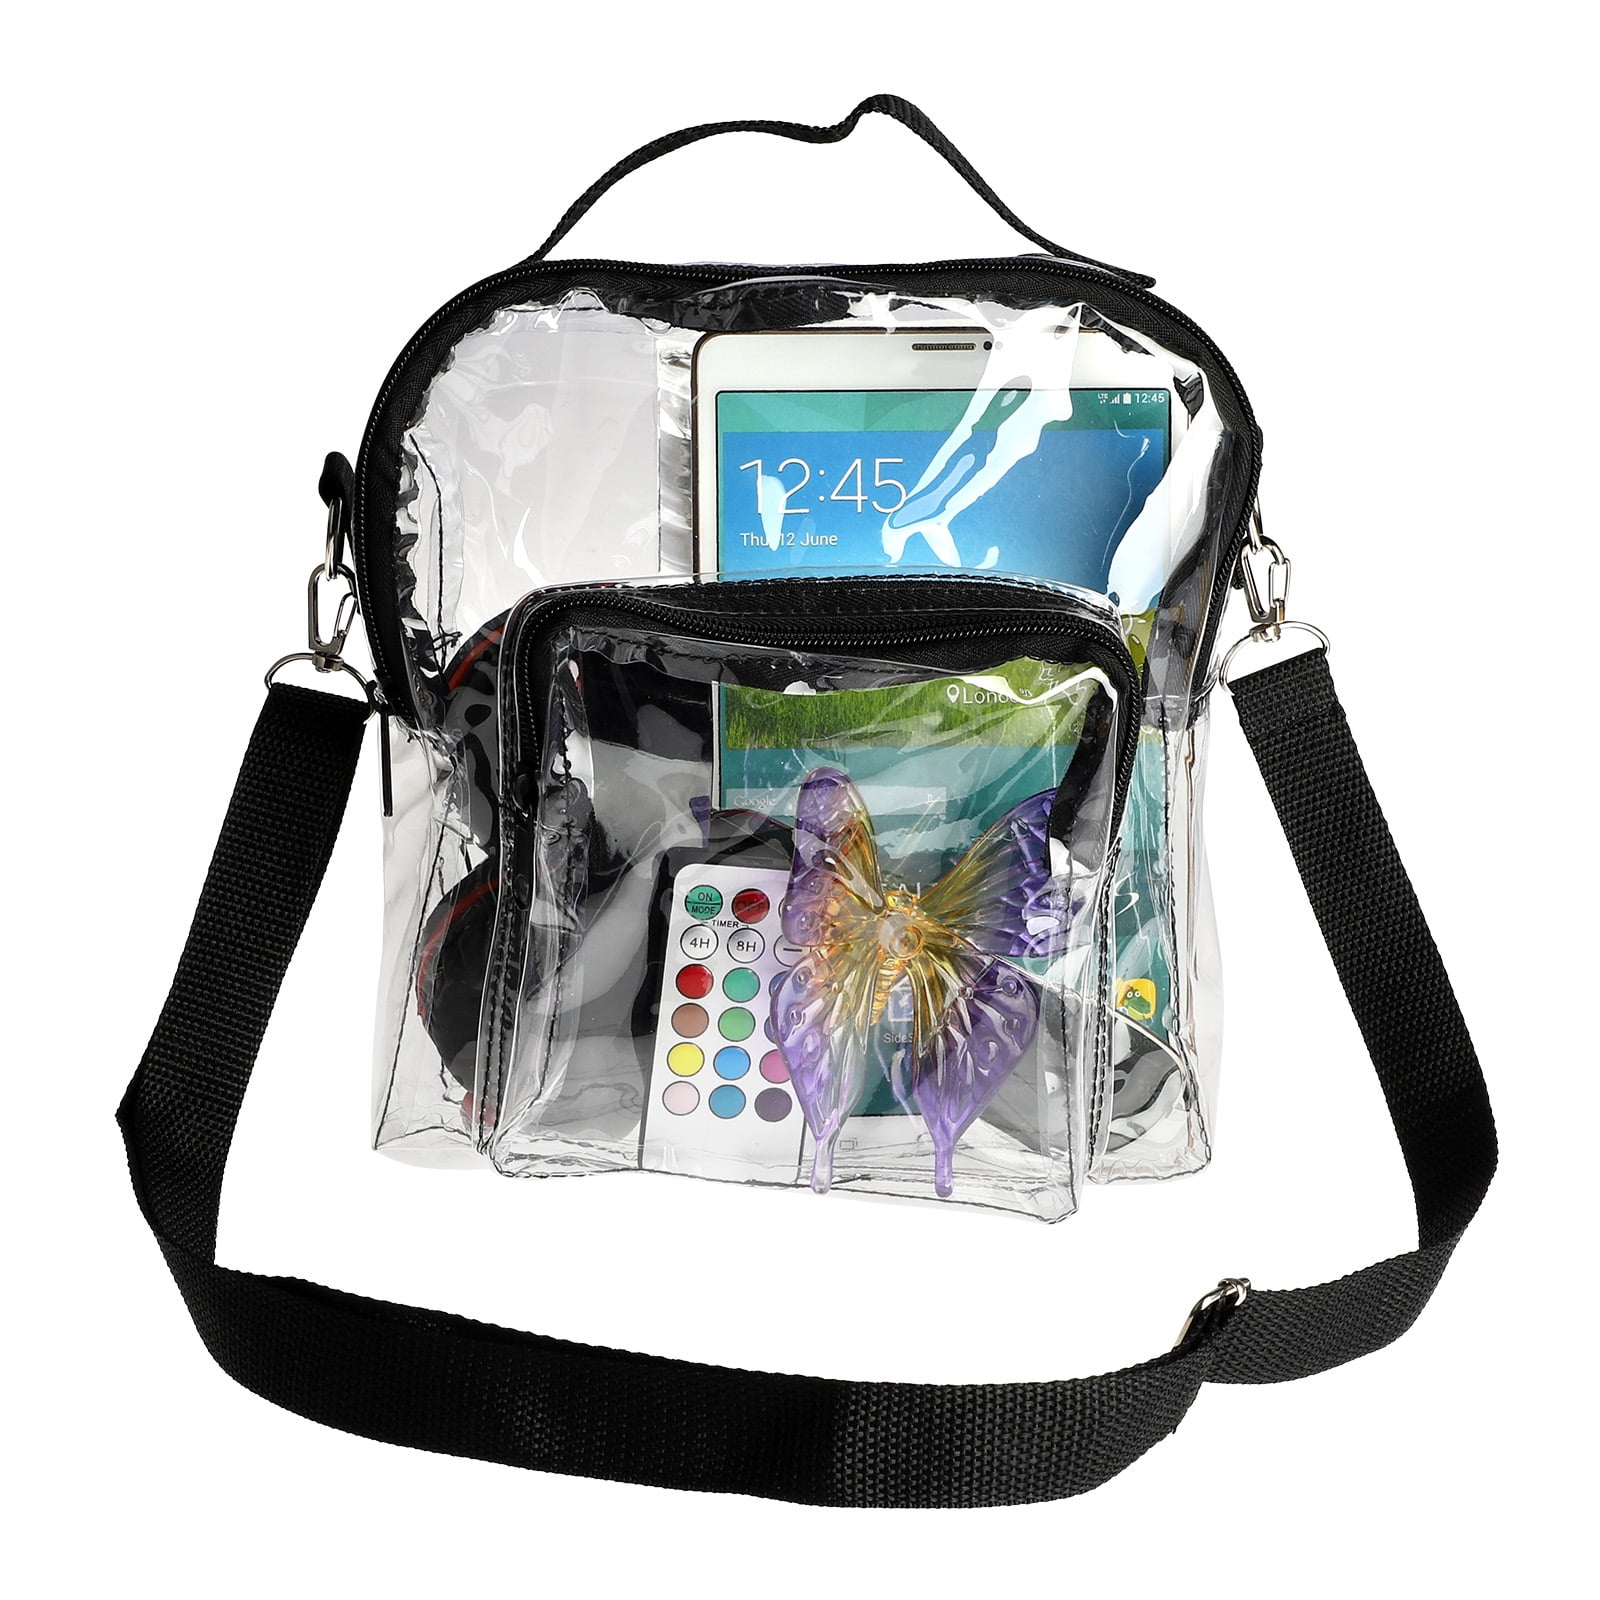 Clear Crossbody Purse Bag Festivals Stadium Approved for Women & Men Travel,Concerts